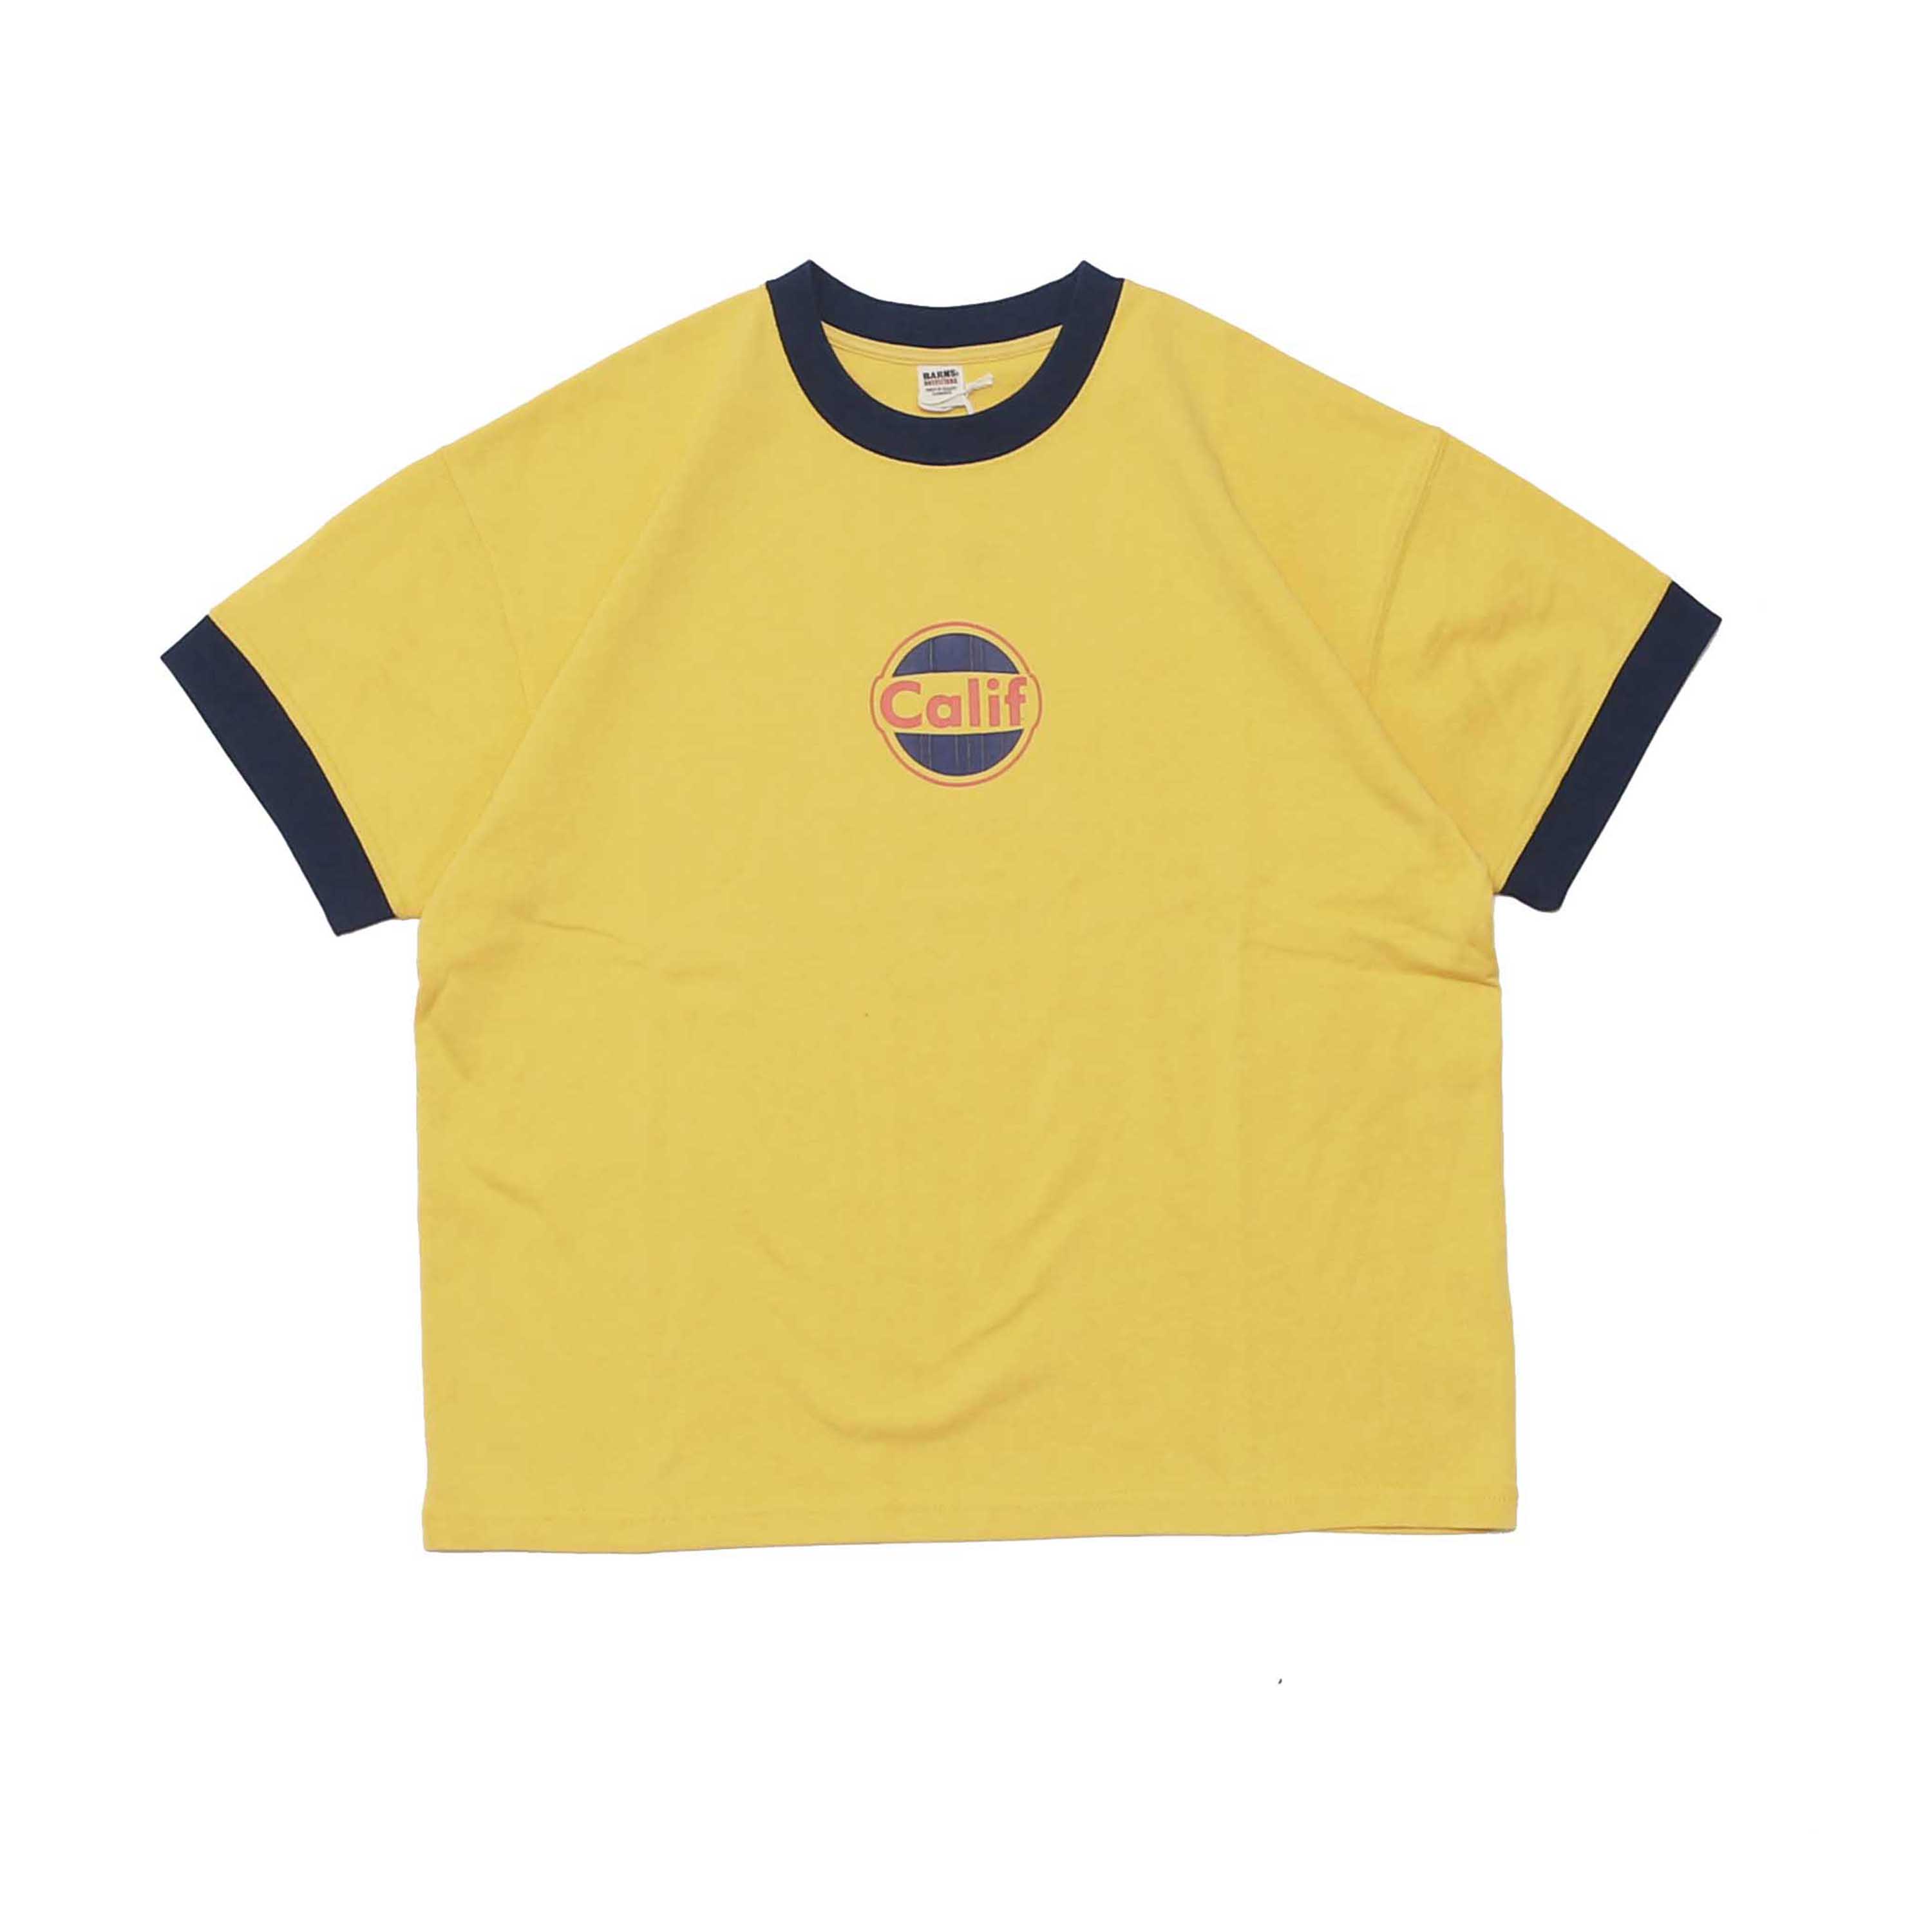 RELAXED FIT RINGER PRINTED S/S TEE - CALIF YELLOW(BR-24212)